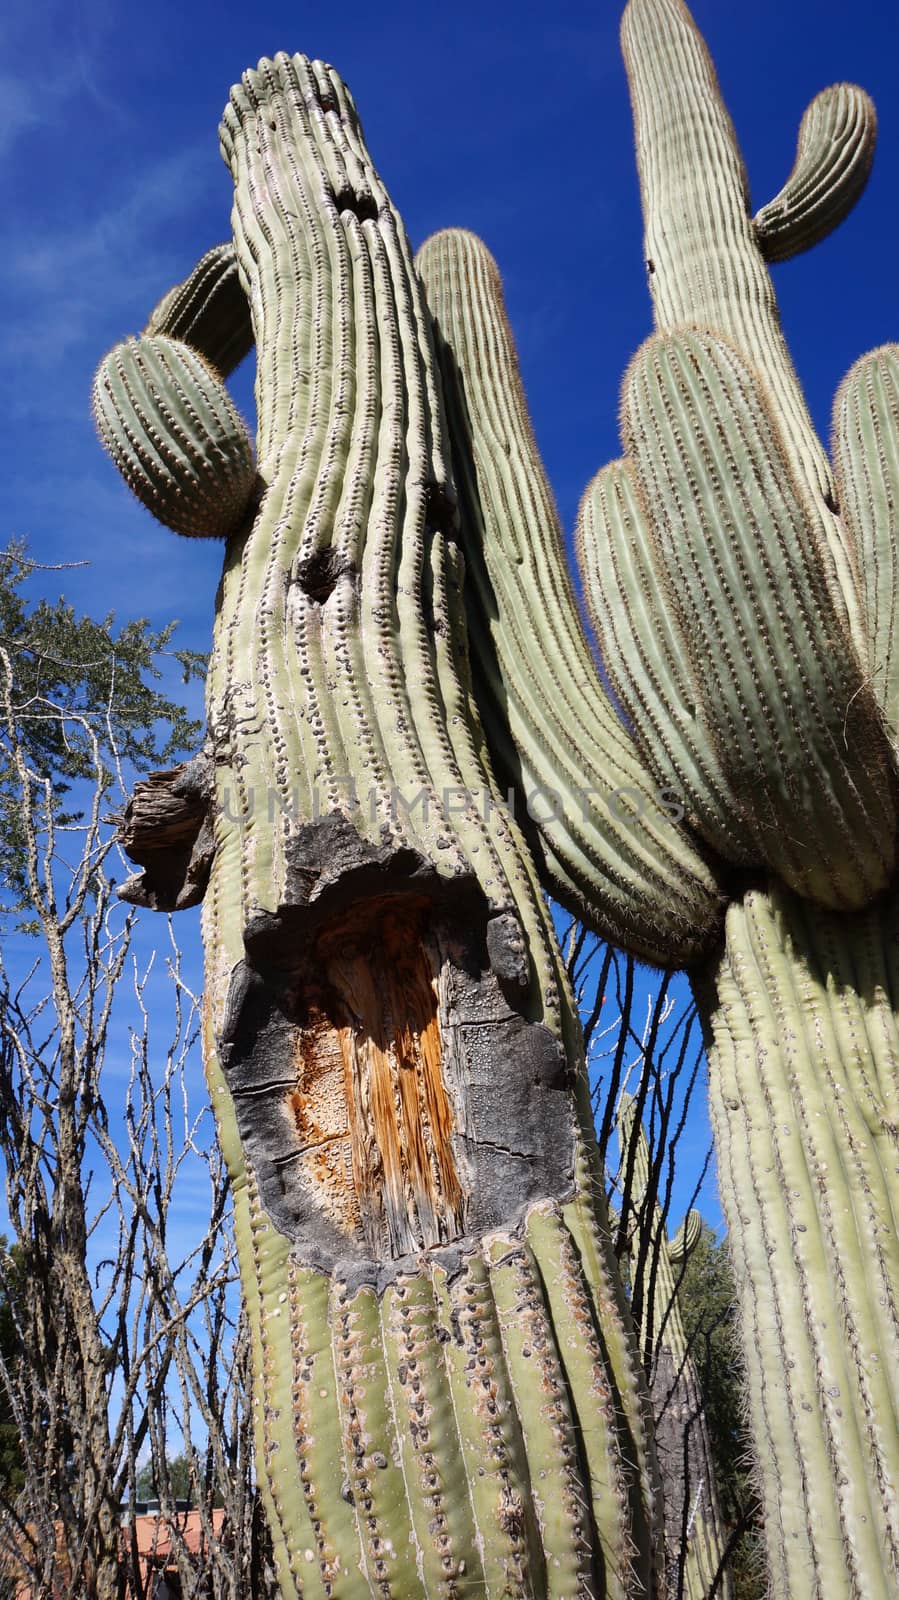 Tall Saguaro Cactus with blue sky as background by tang90246